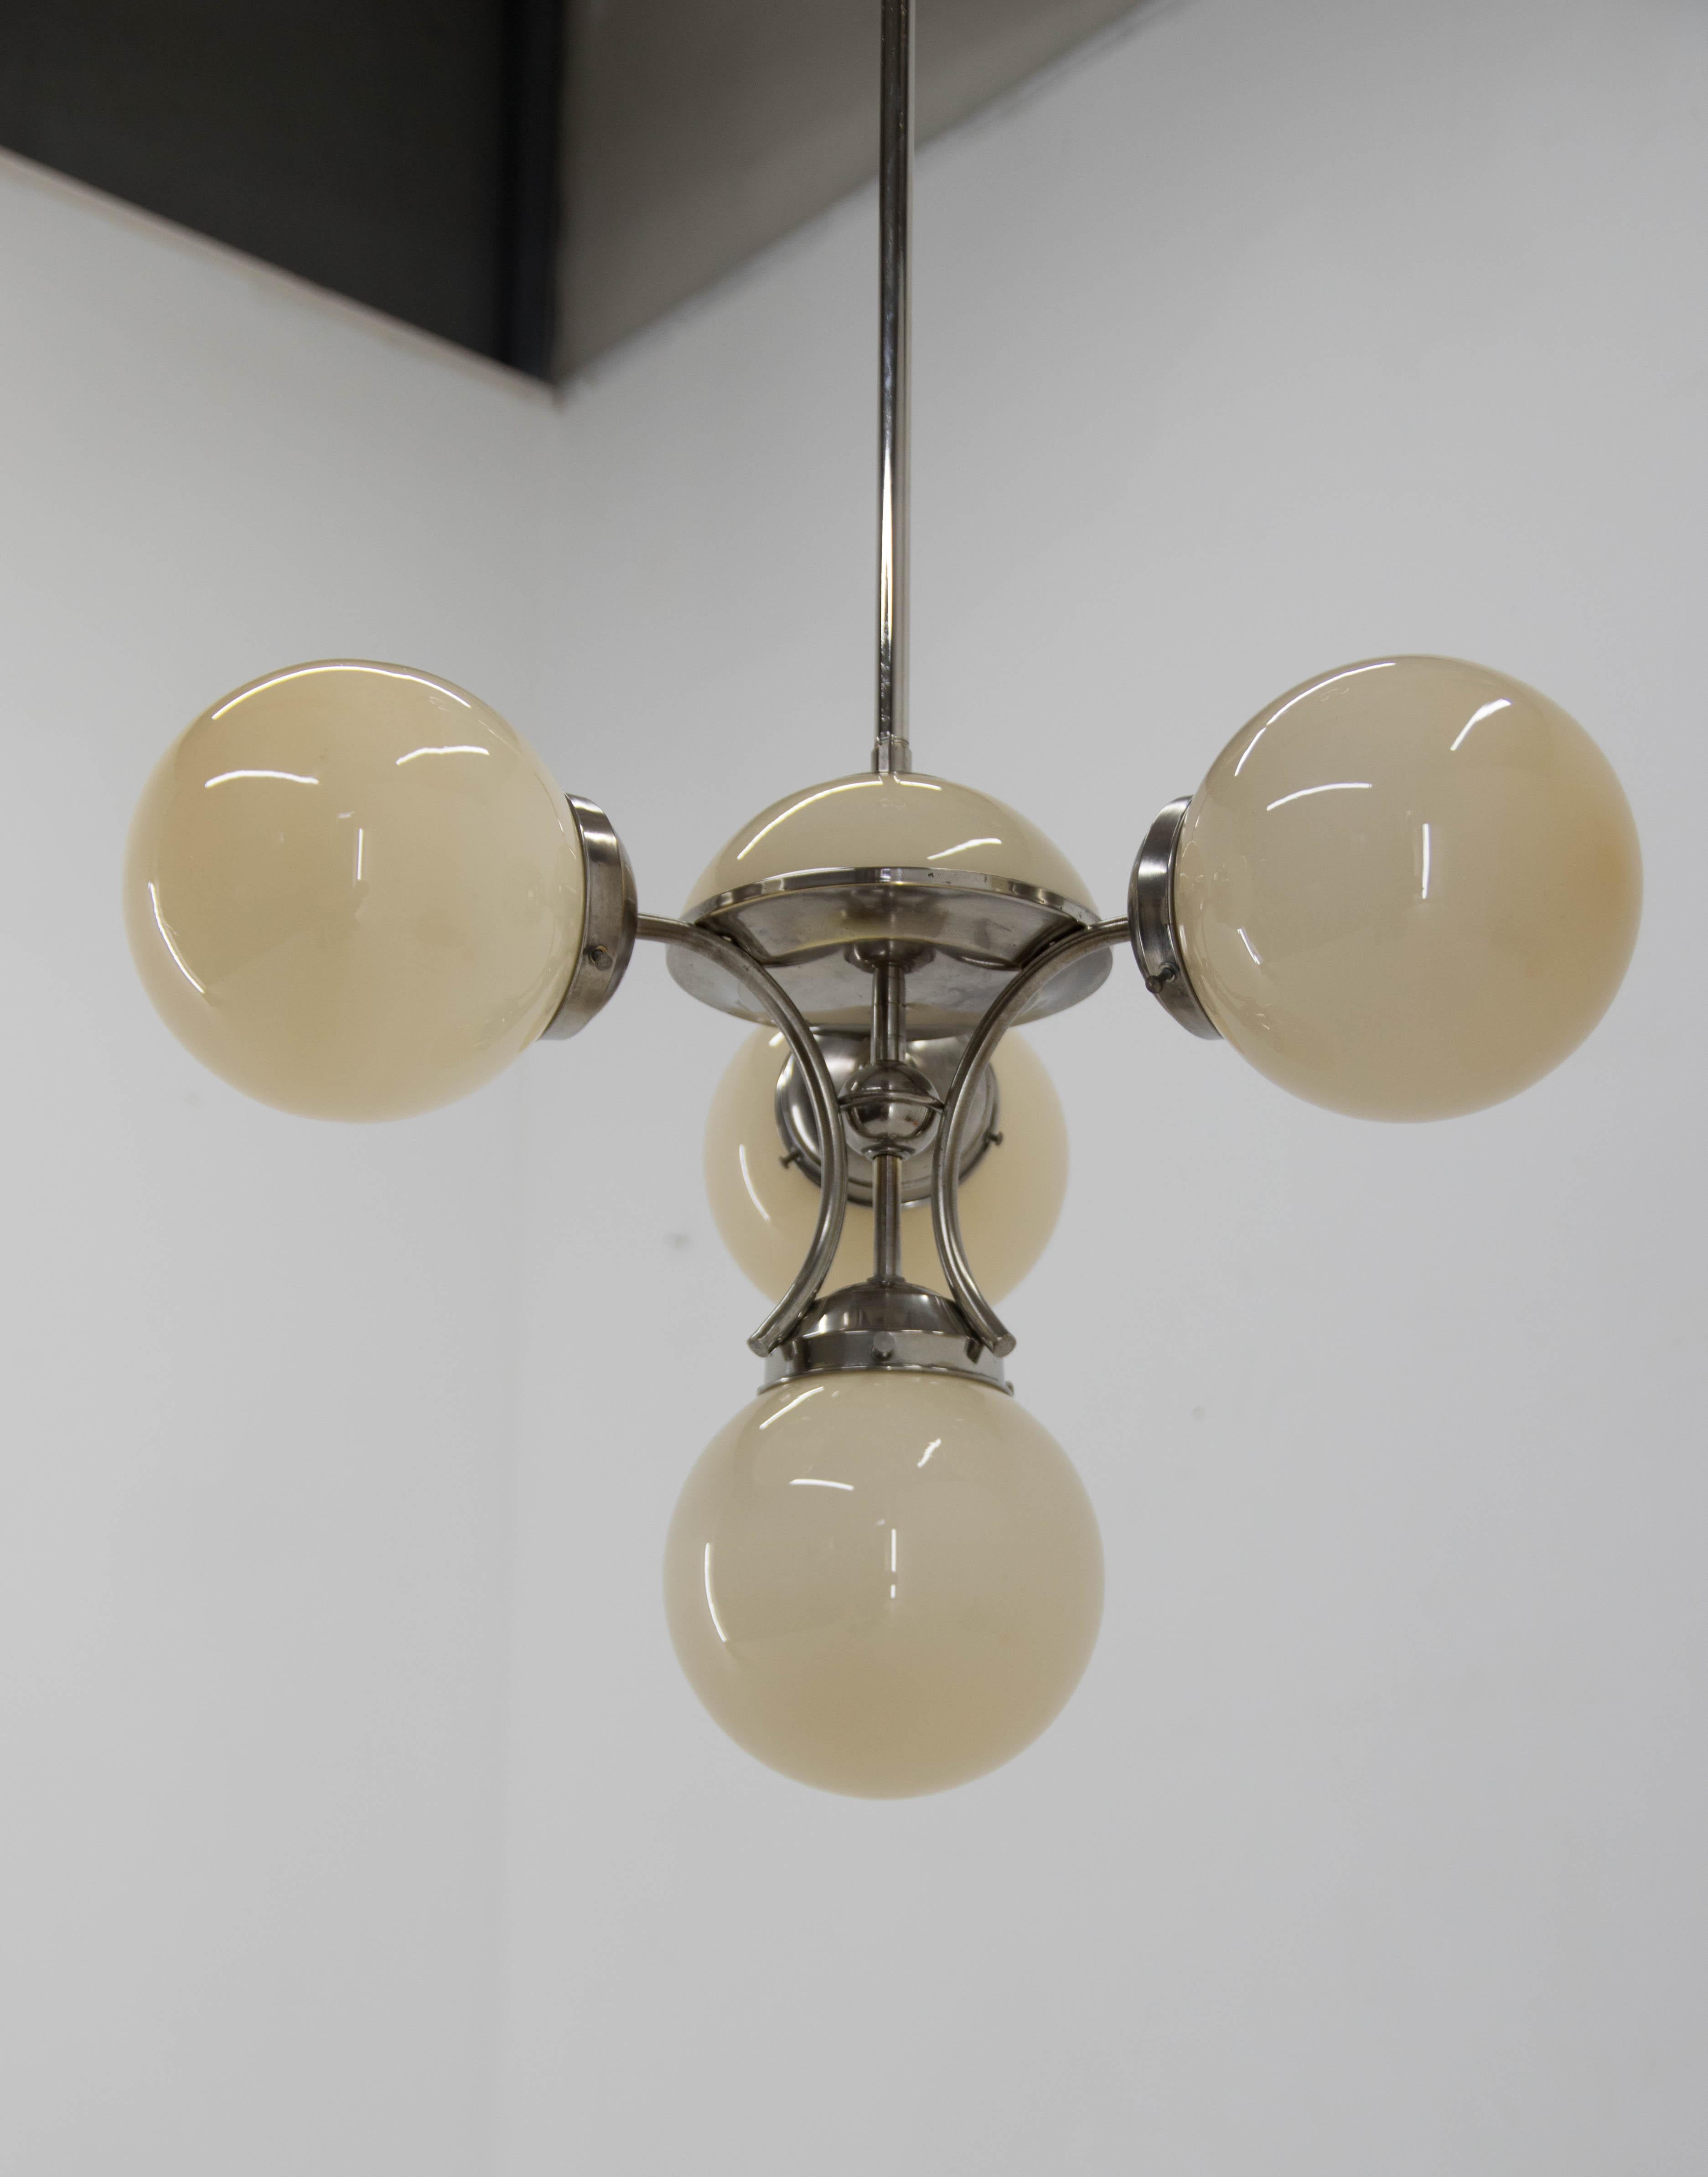 Unique Art Deco Nickel and Glass Chandelier, 1930s For Sale 4